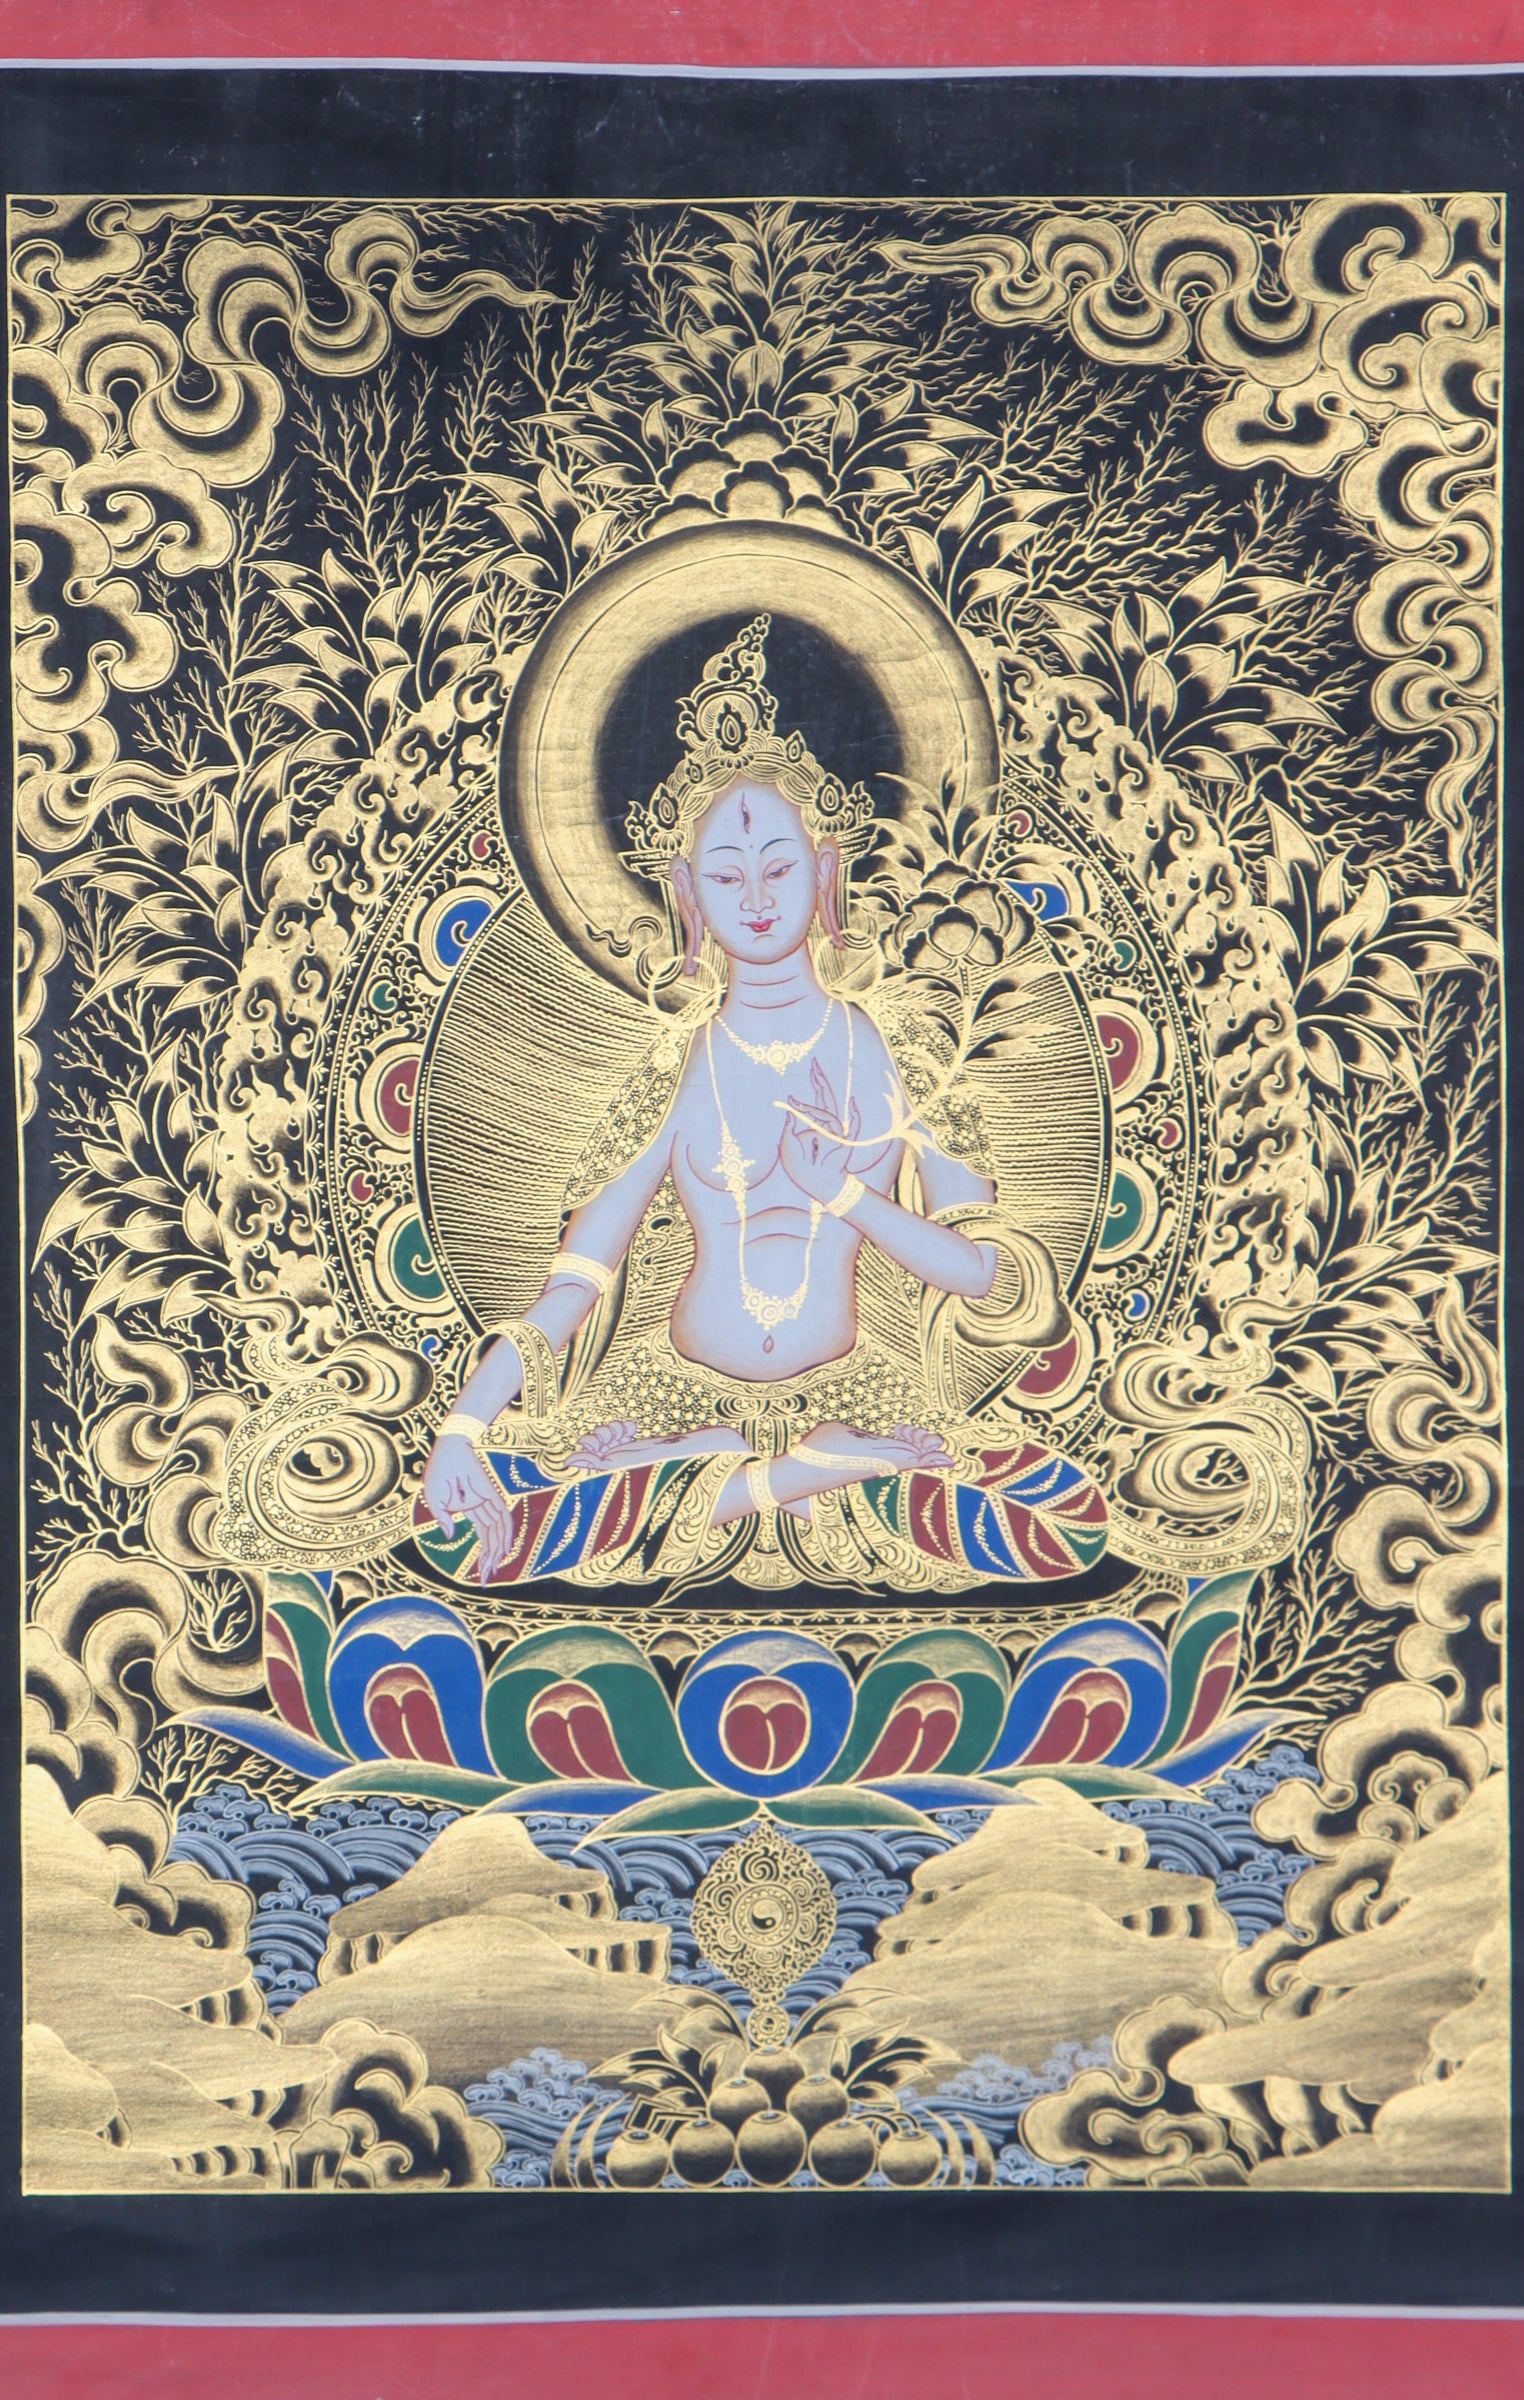 White Tara Thangka Painting for wisdom and compassion.